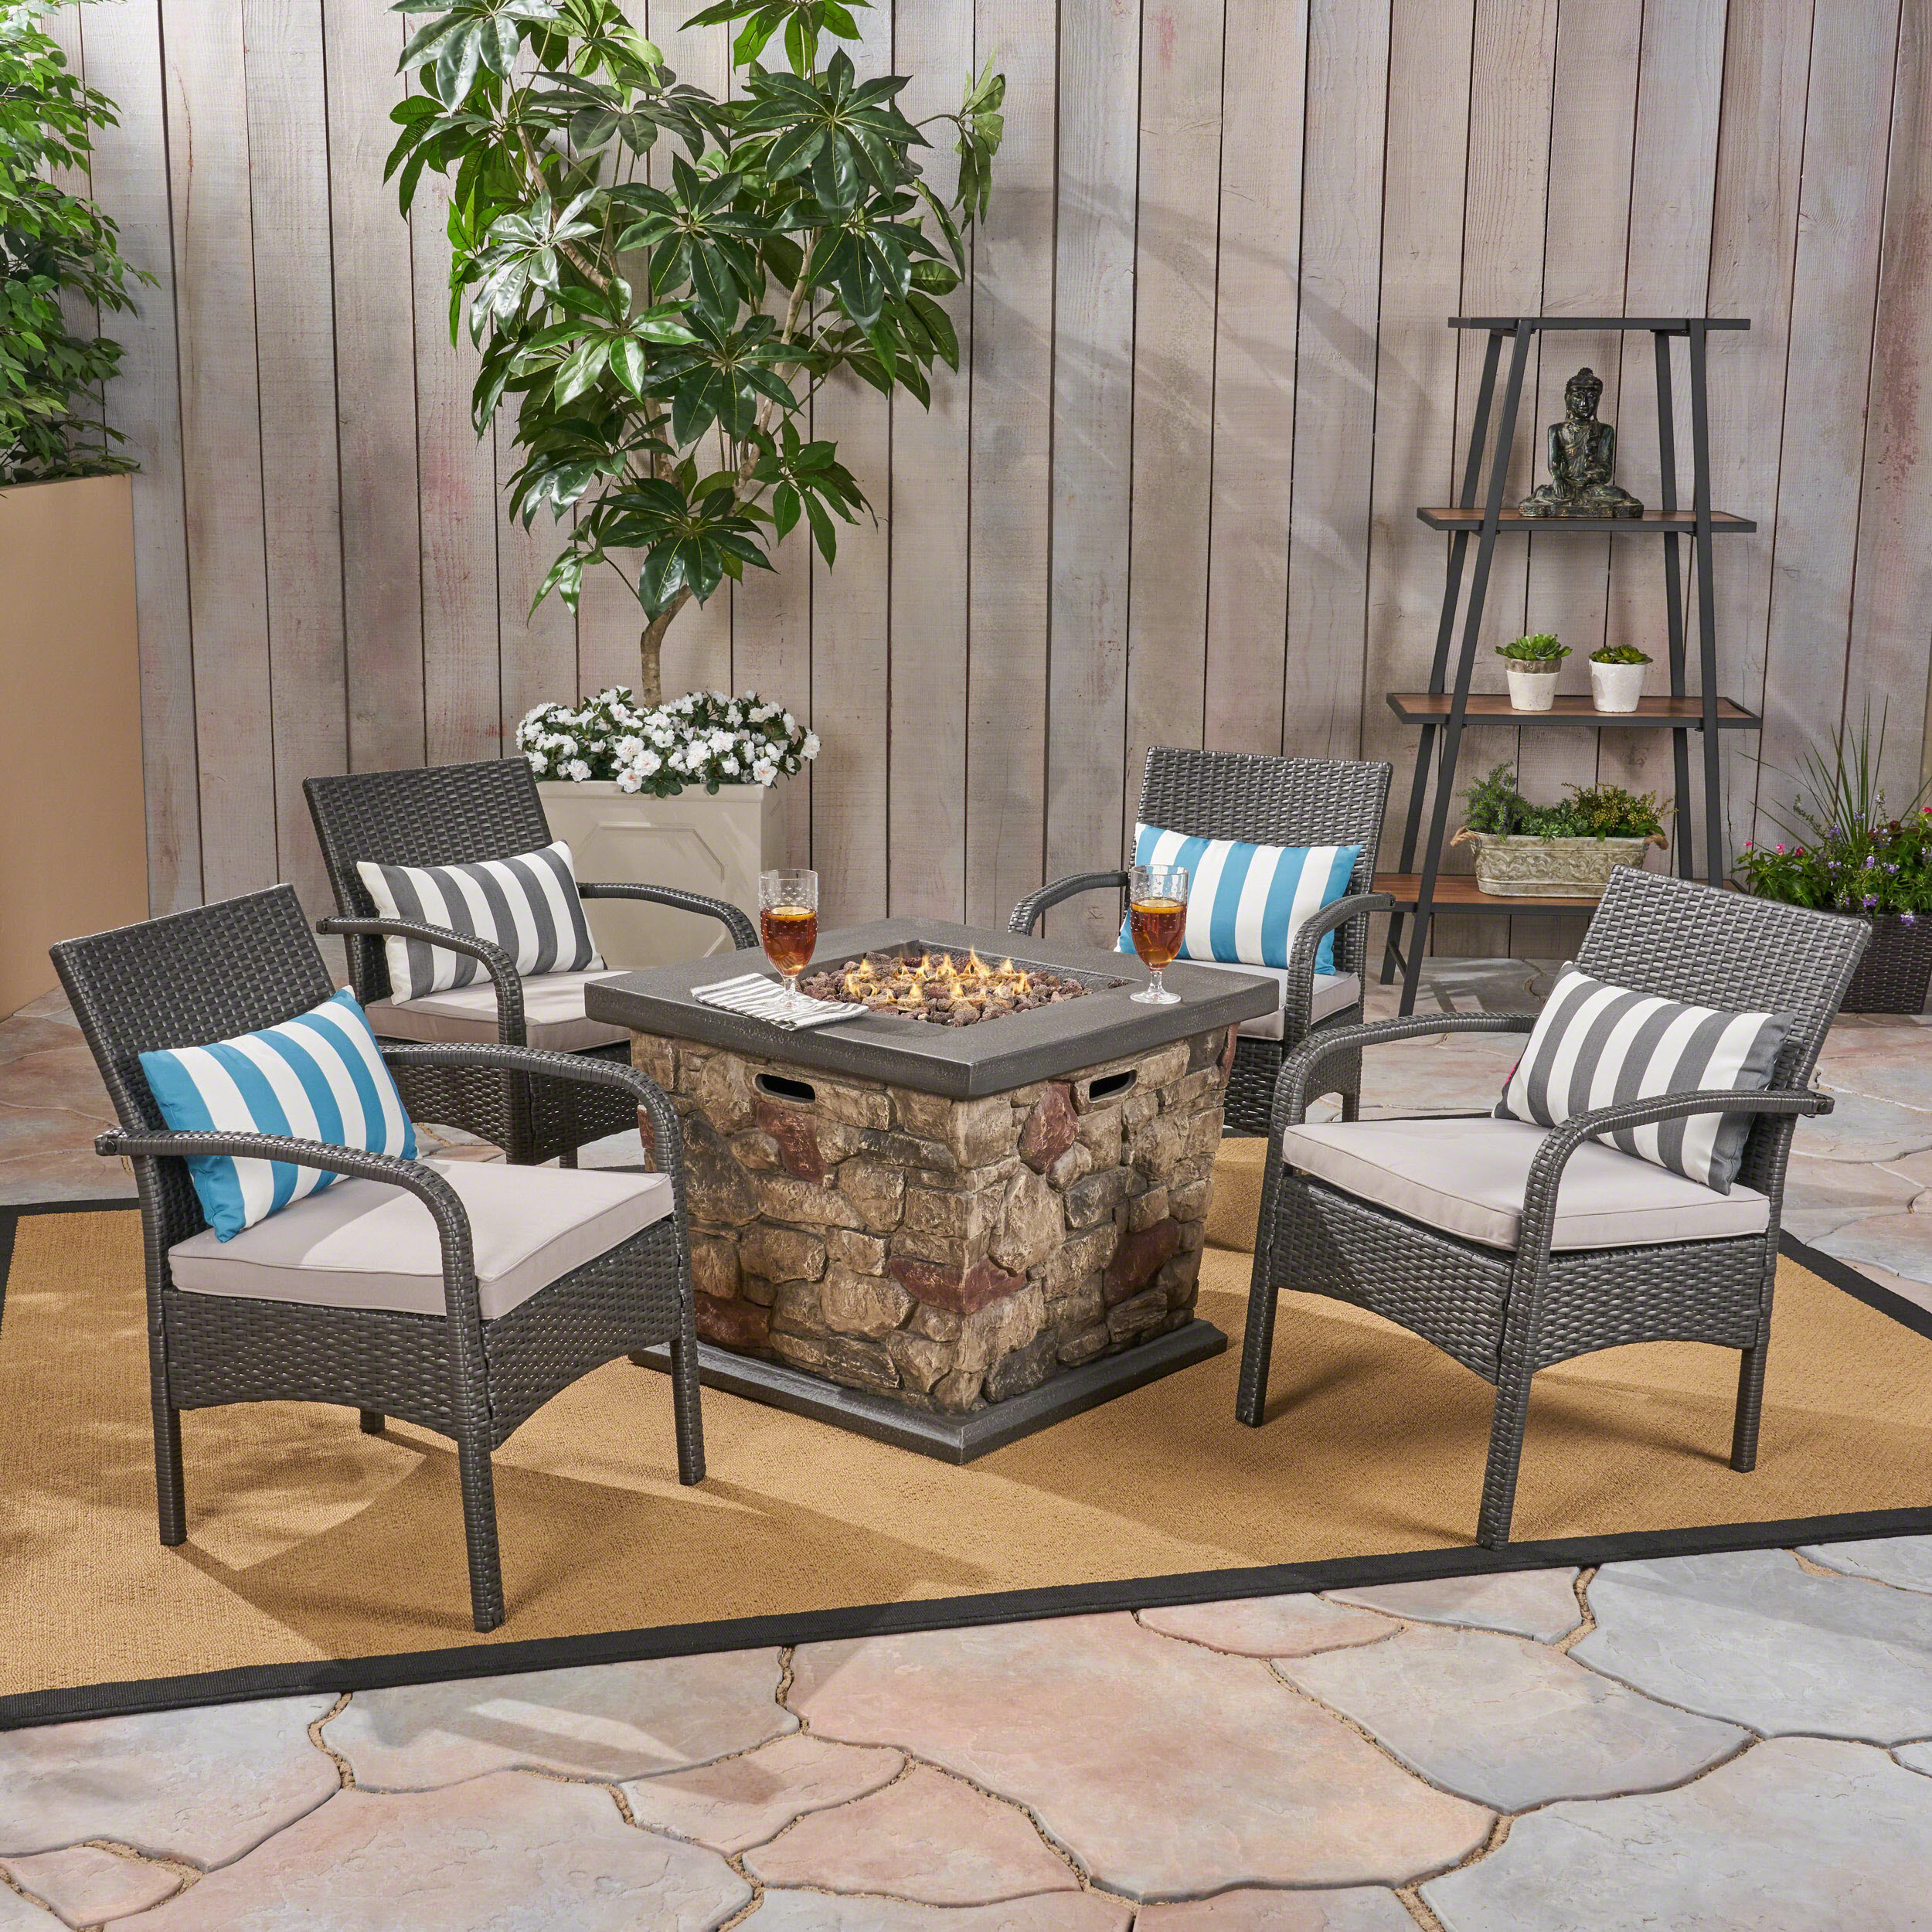 Capitan Outdoor 5 Piece Wicker Chat Set with Stone Finished Fire Pit, Gray, Silver, Stone - image 1 of 1